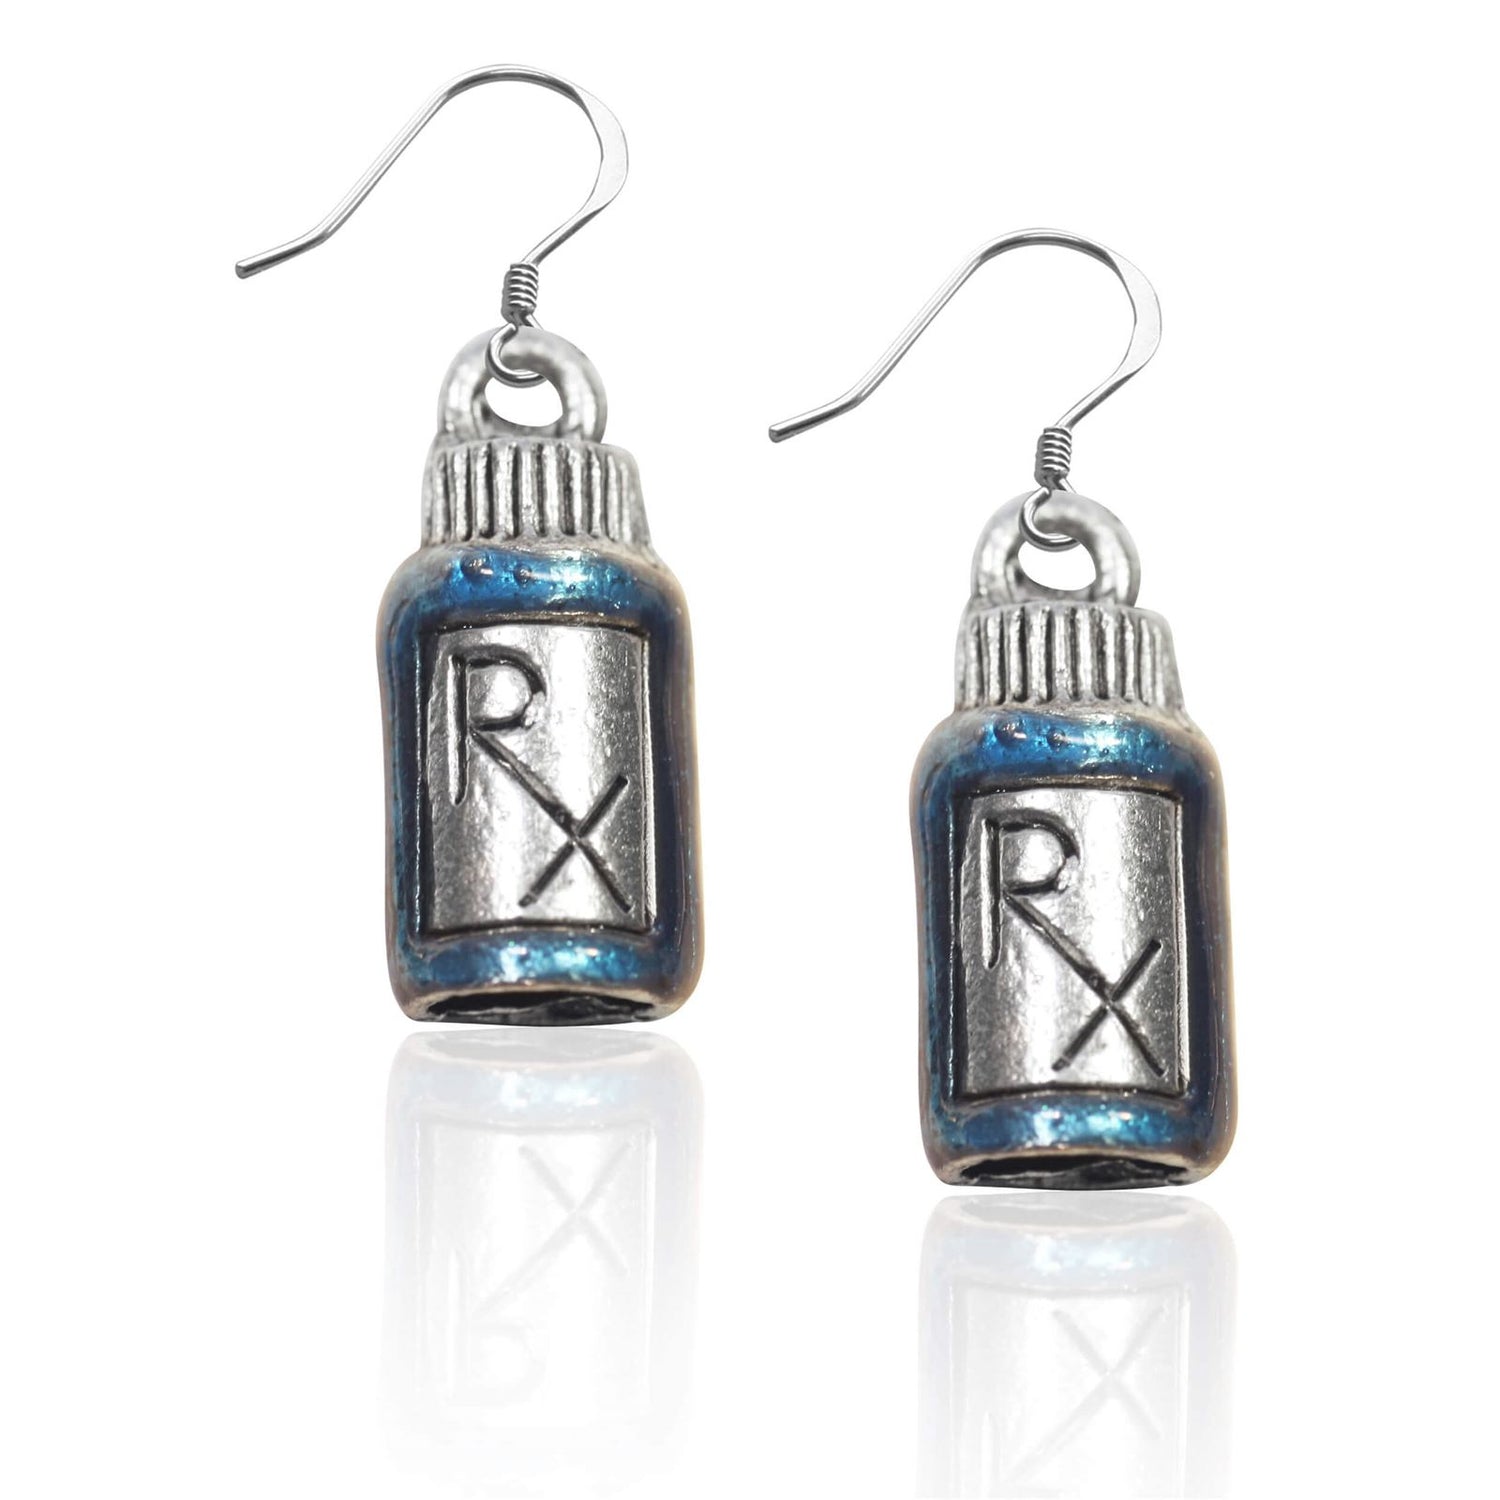 Whimsical Gifts | RX Charm Earrings in Silver Finish | Professions Themed | Dental | Medical | First Responder | Jewelry